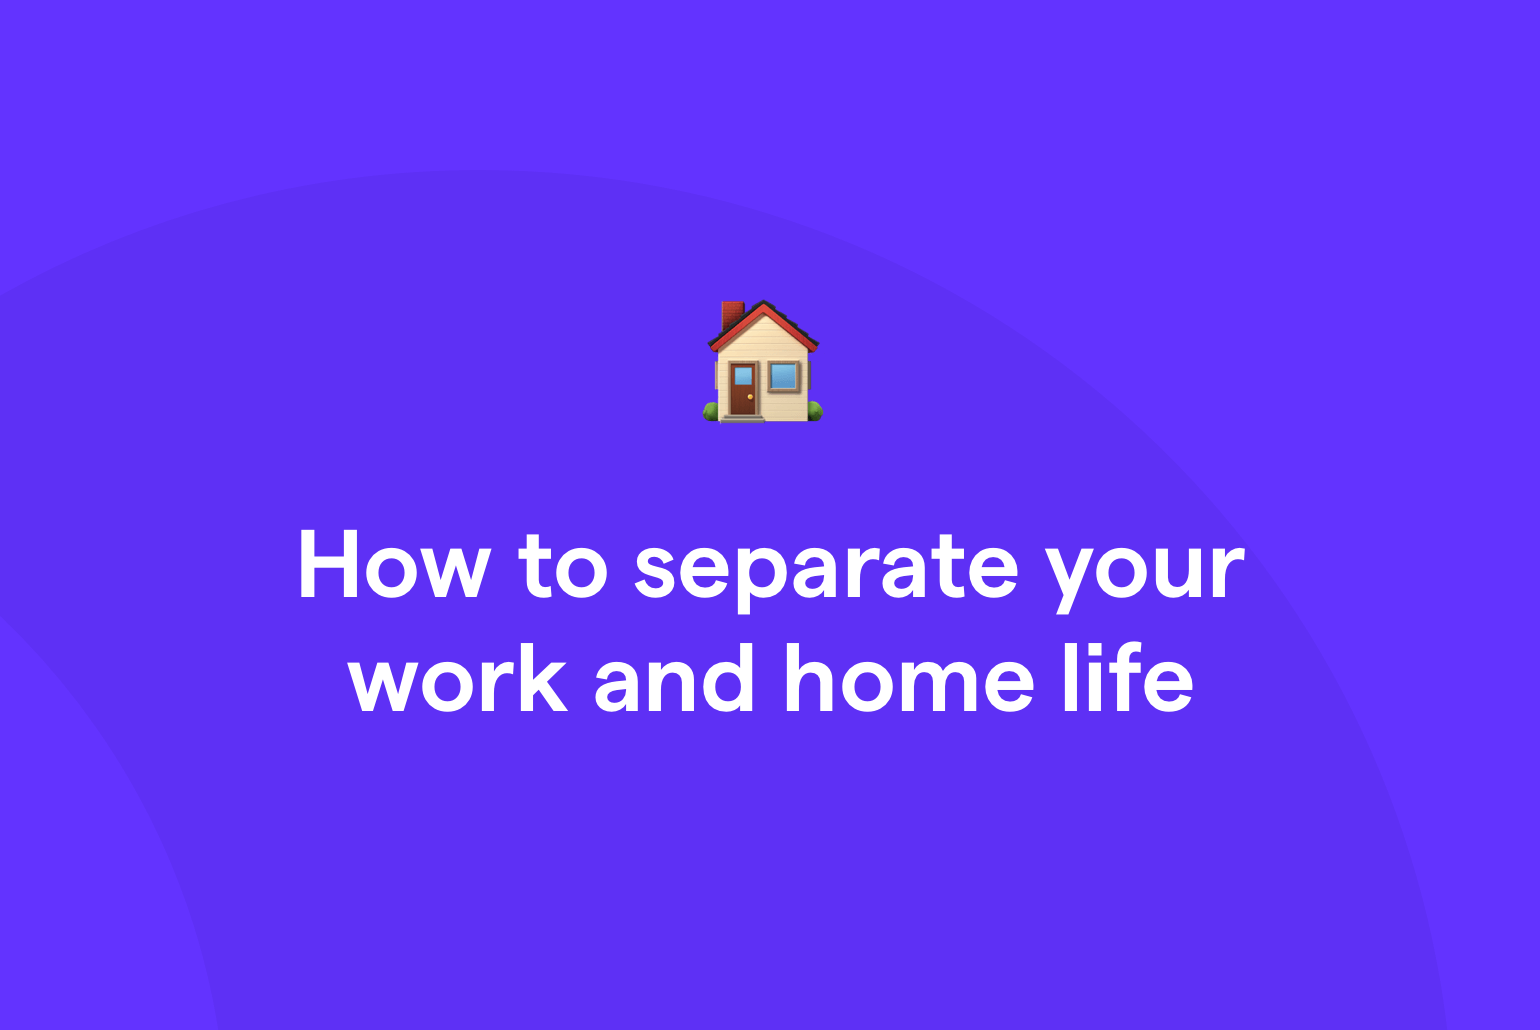 how-to-separate-work-home-life-without-worrying-about-money